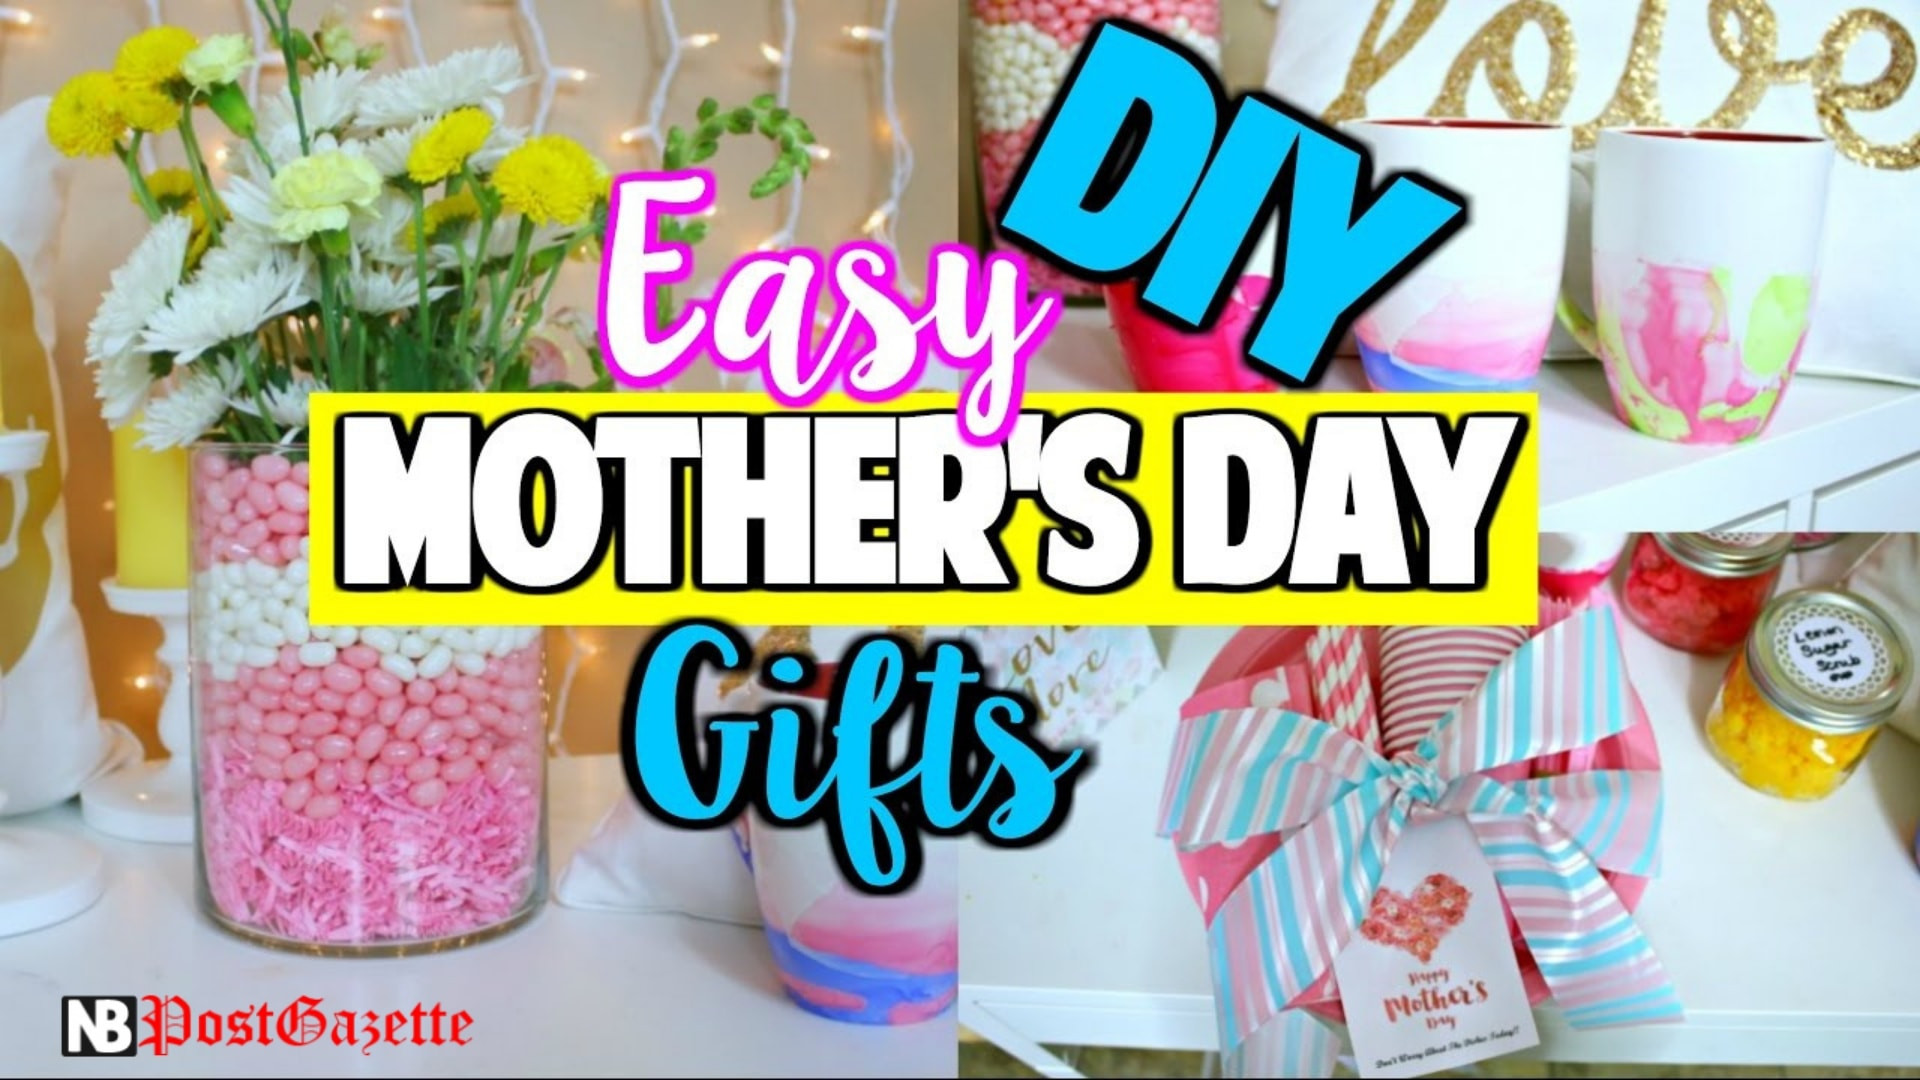 Last Minute Mother Day Gift Ideas
 These Are The Best Last Minute Mother s Day Gift Ideas 2019